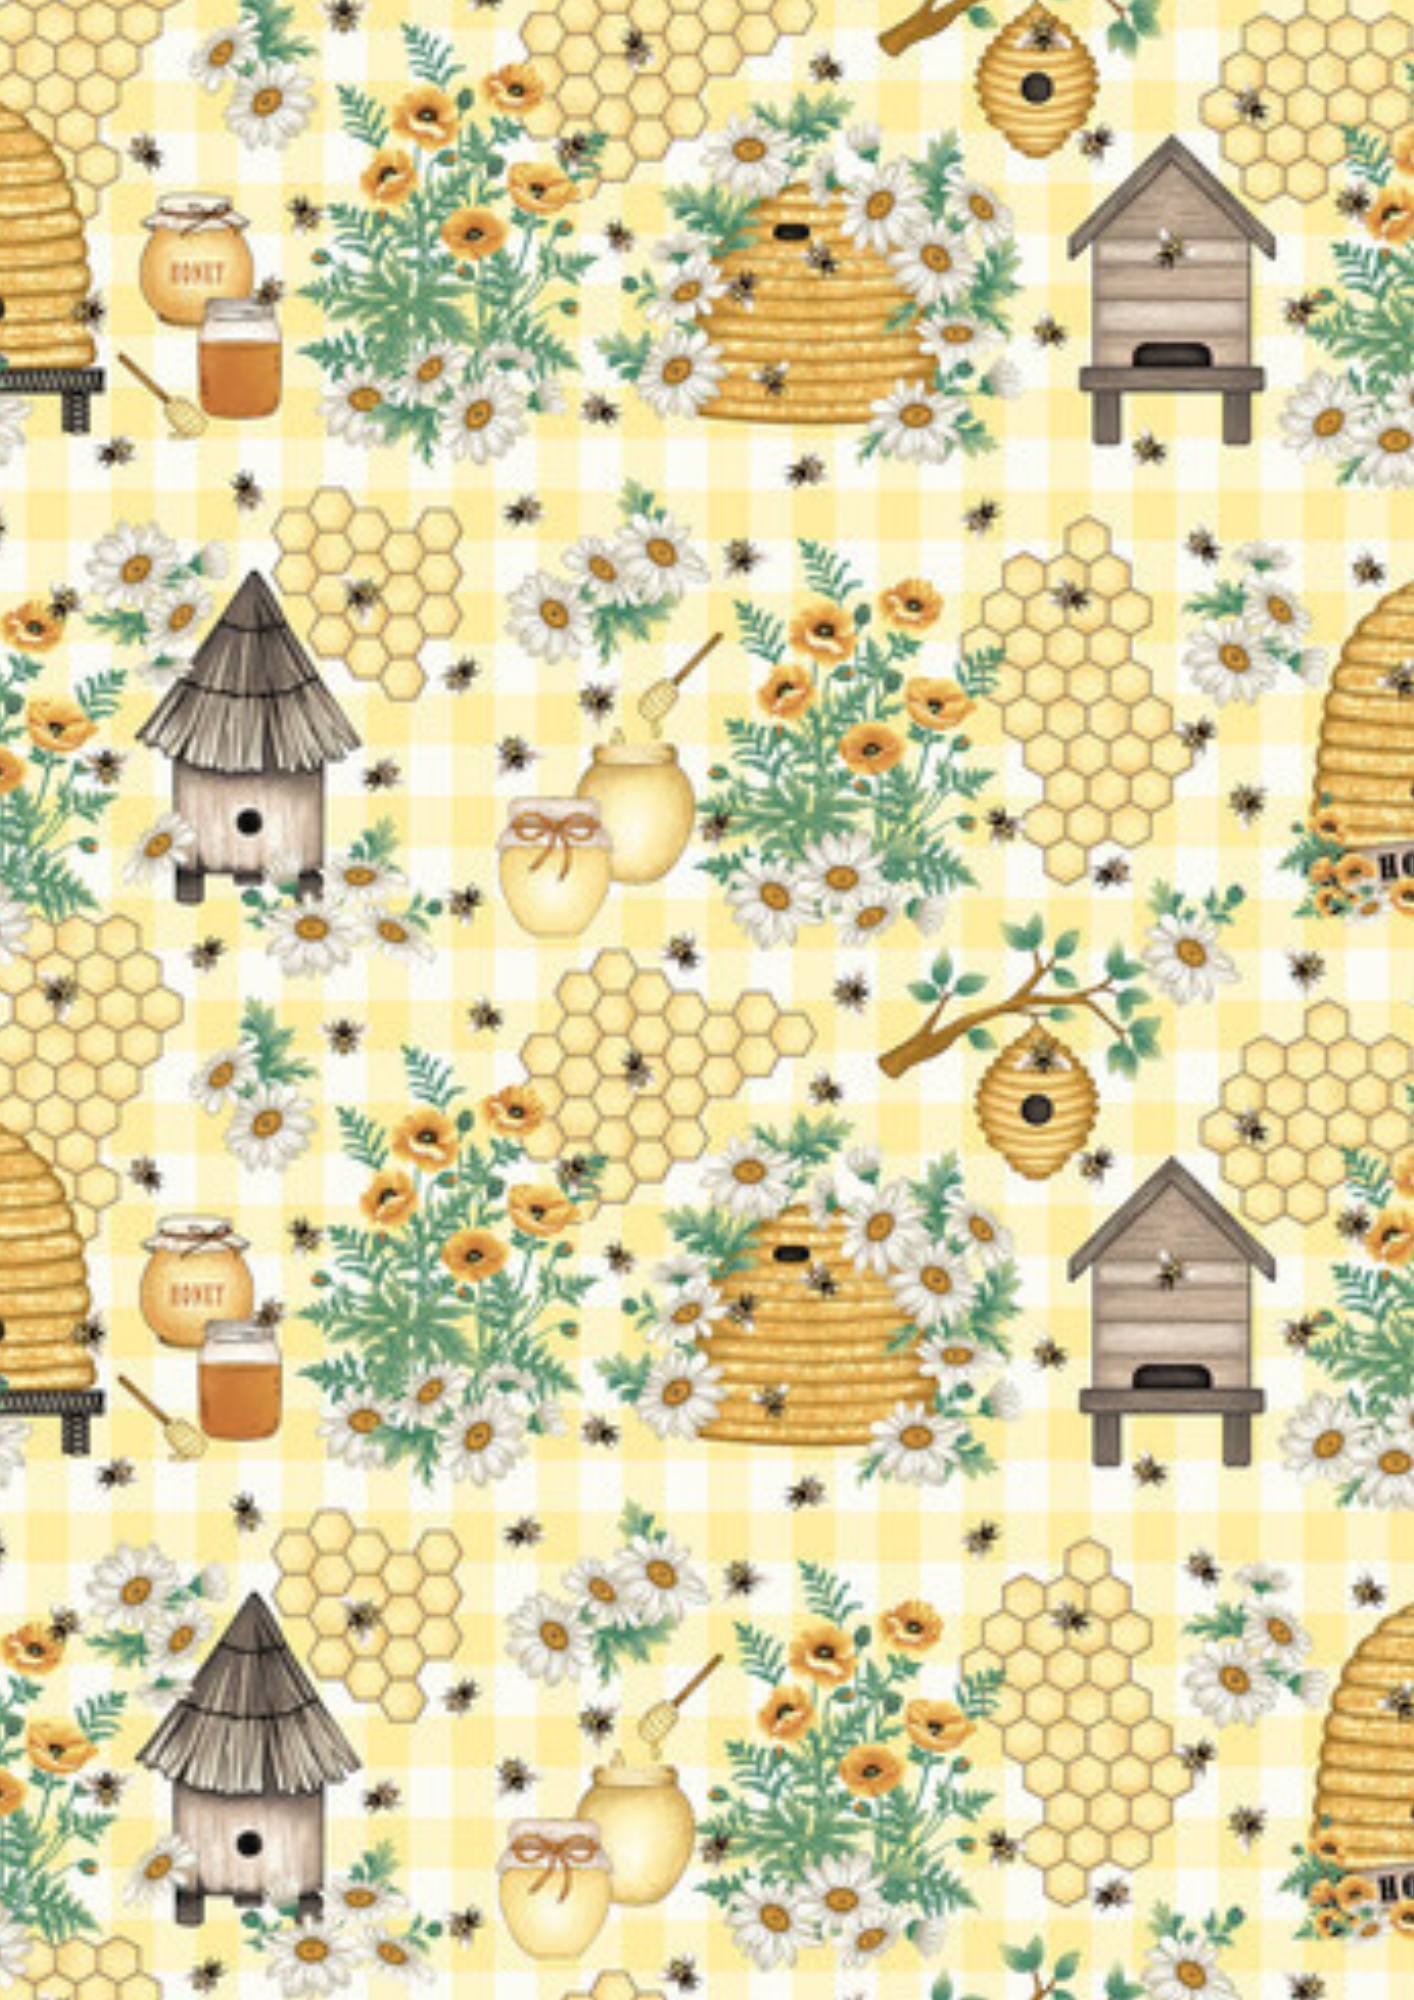 Bee Fabric Panel Cotton, Baby Fabric Panels for Quilting, Bee